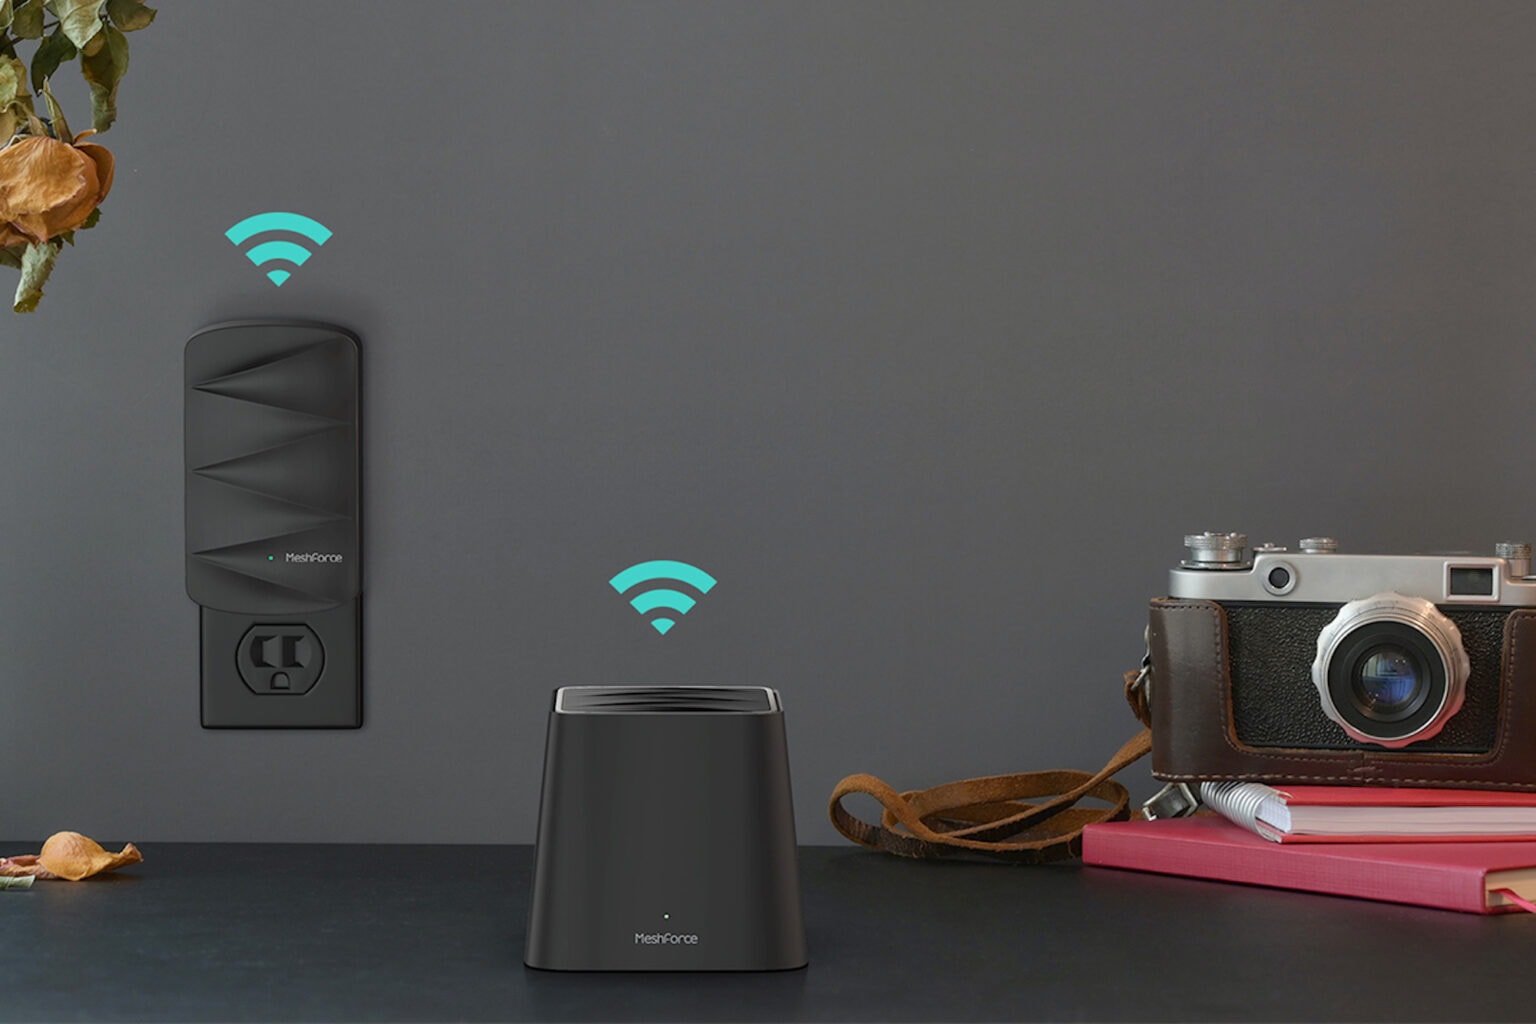 Get the best connection with these high-end routers.